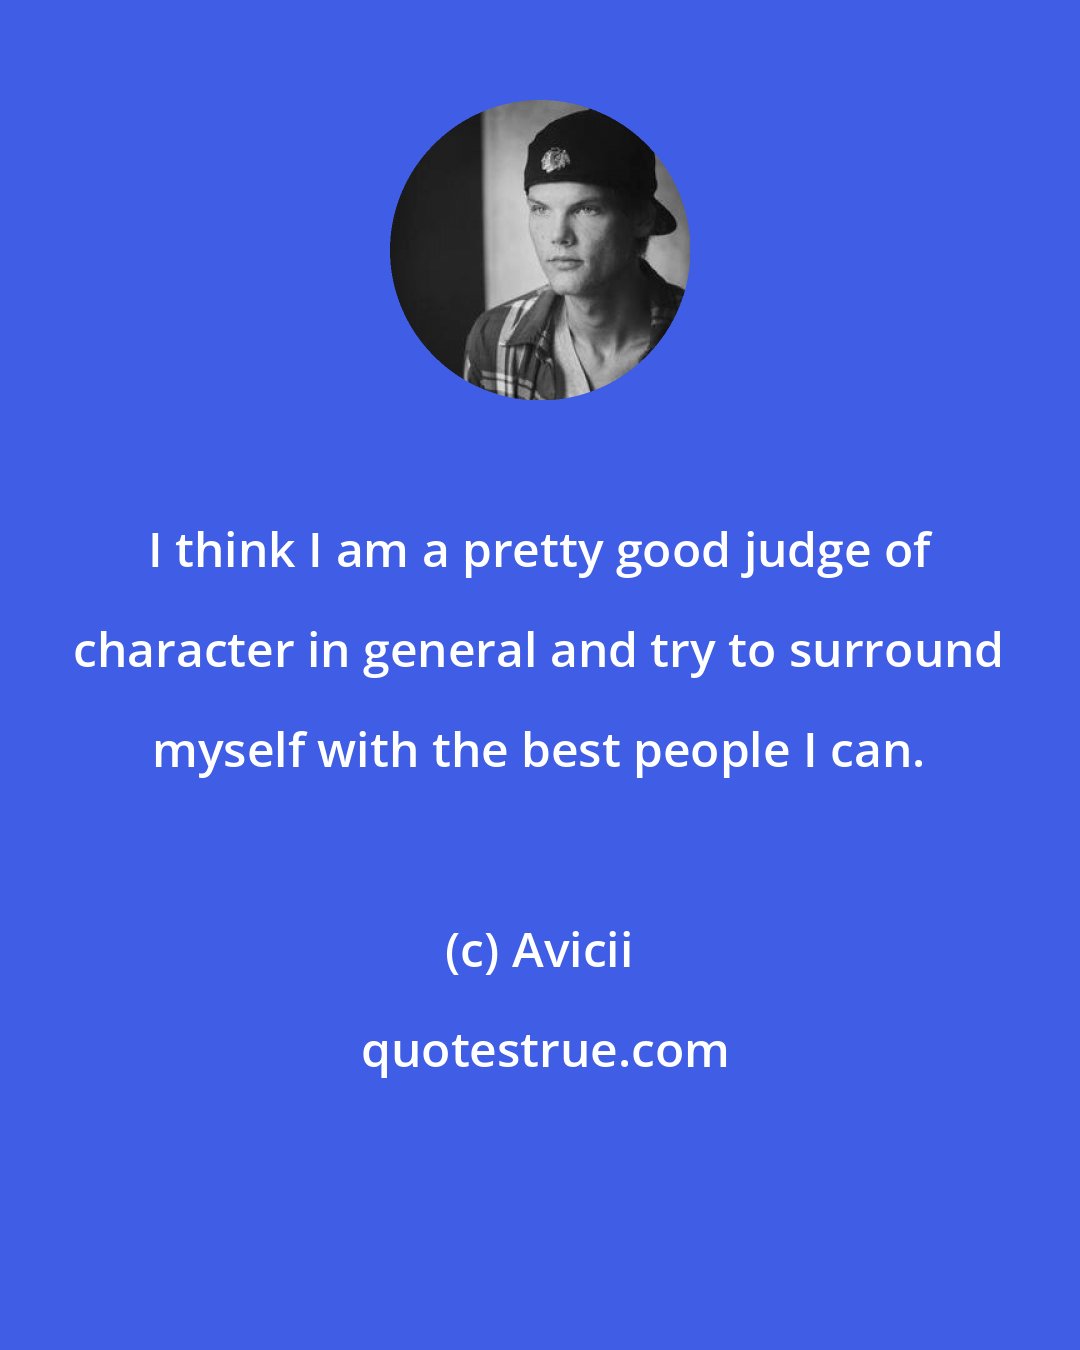 Avicii: I think I am a pretty good judge of character in general and try to surround myself with the best people I can.